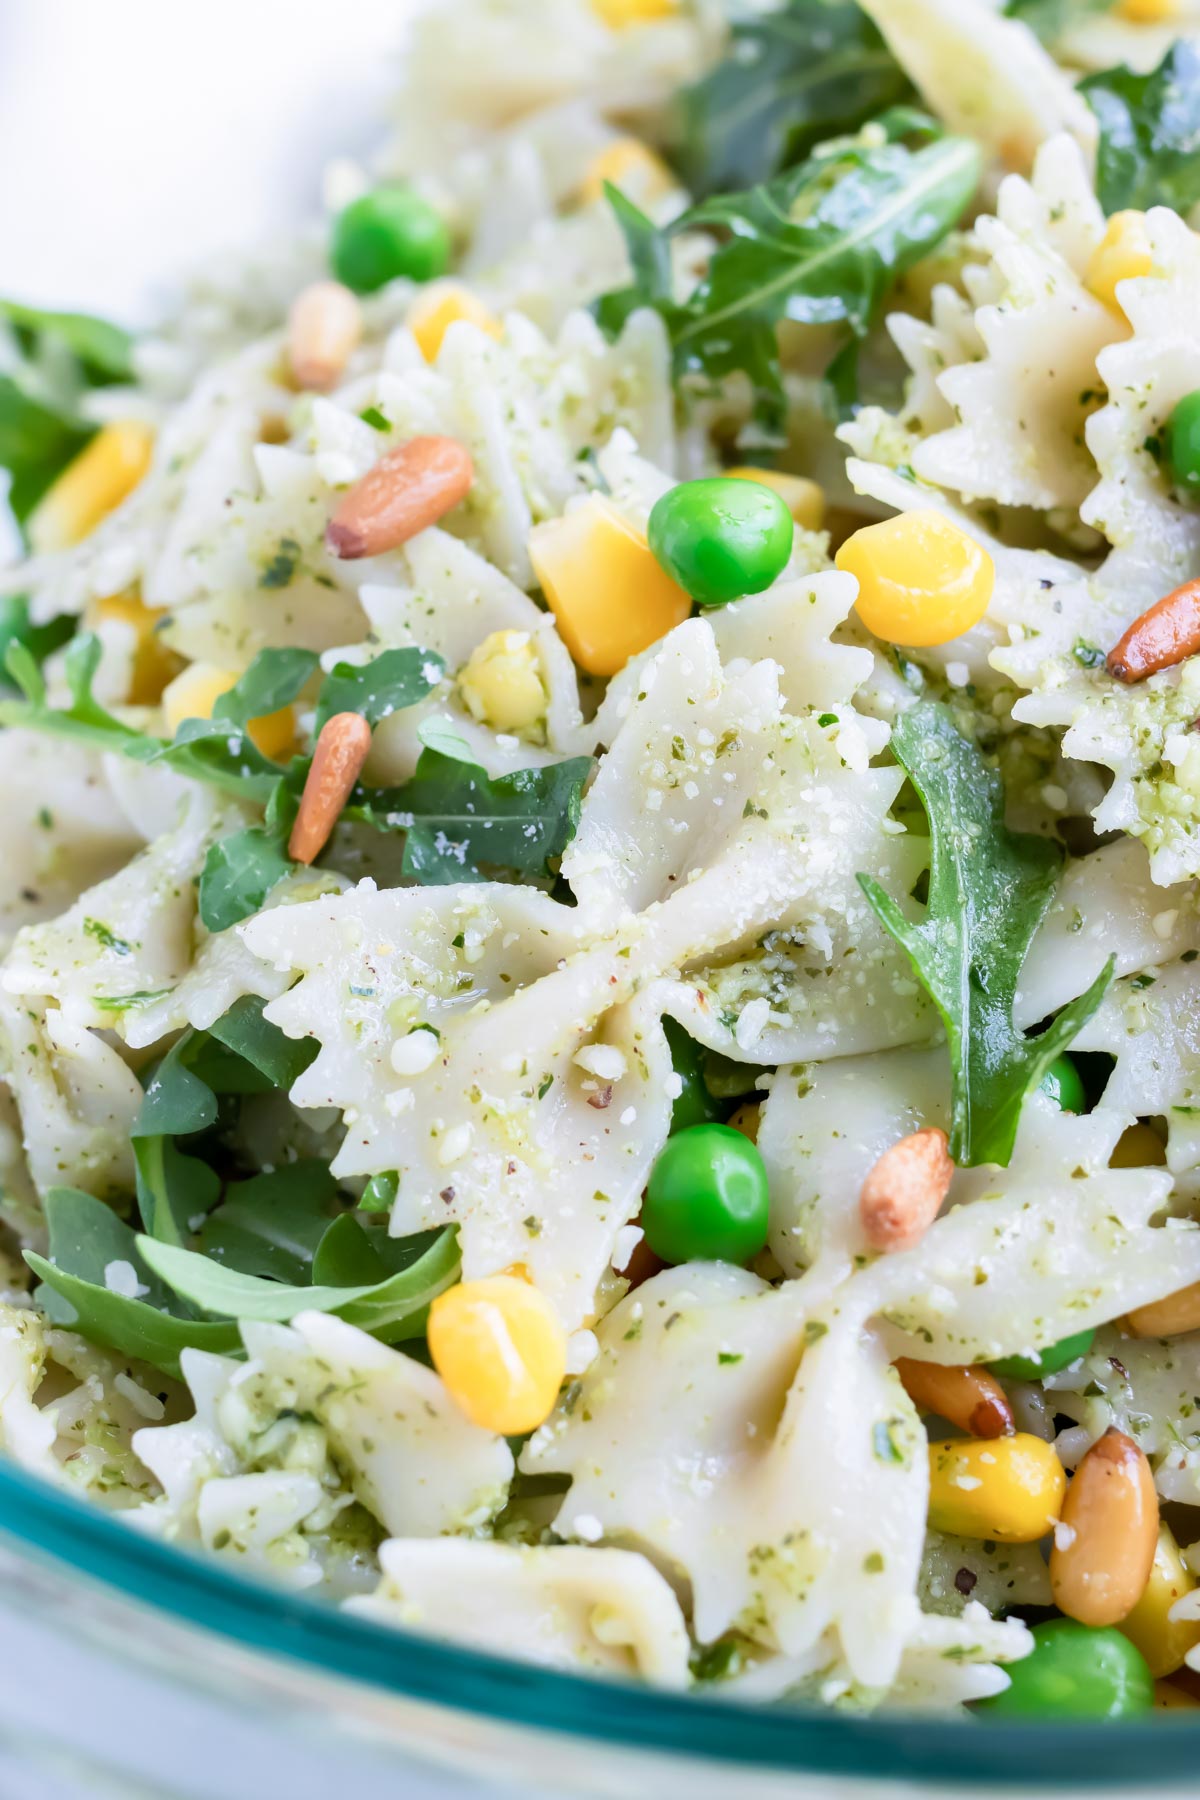 This summer side dish is loaded with healthy ingredients.